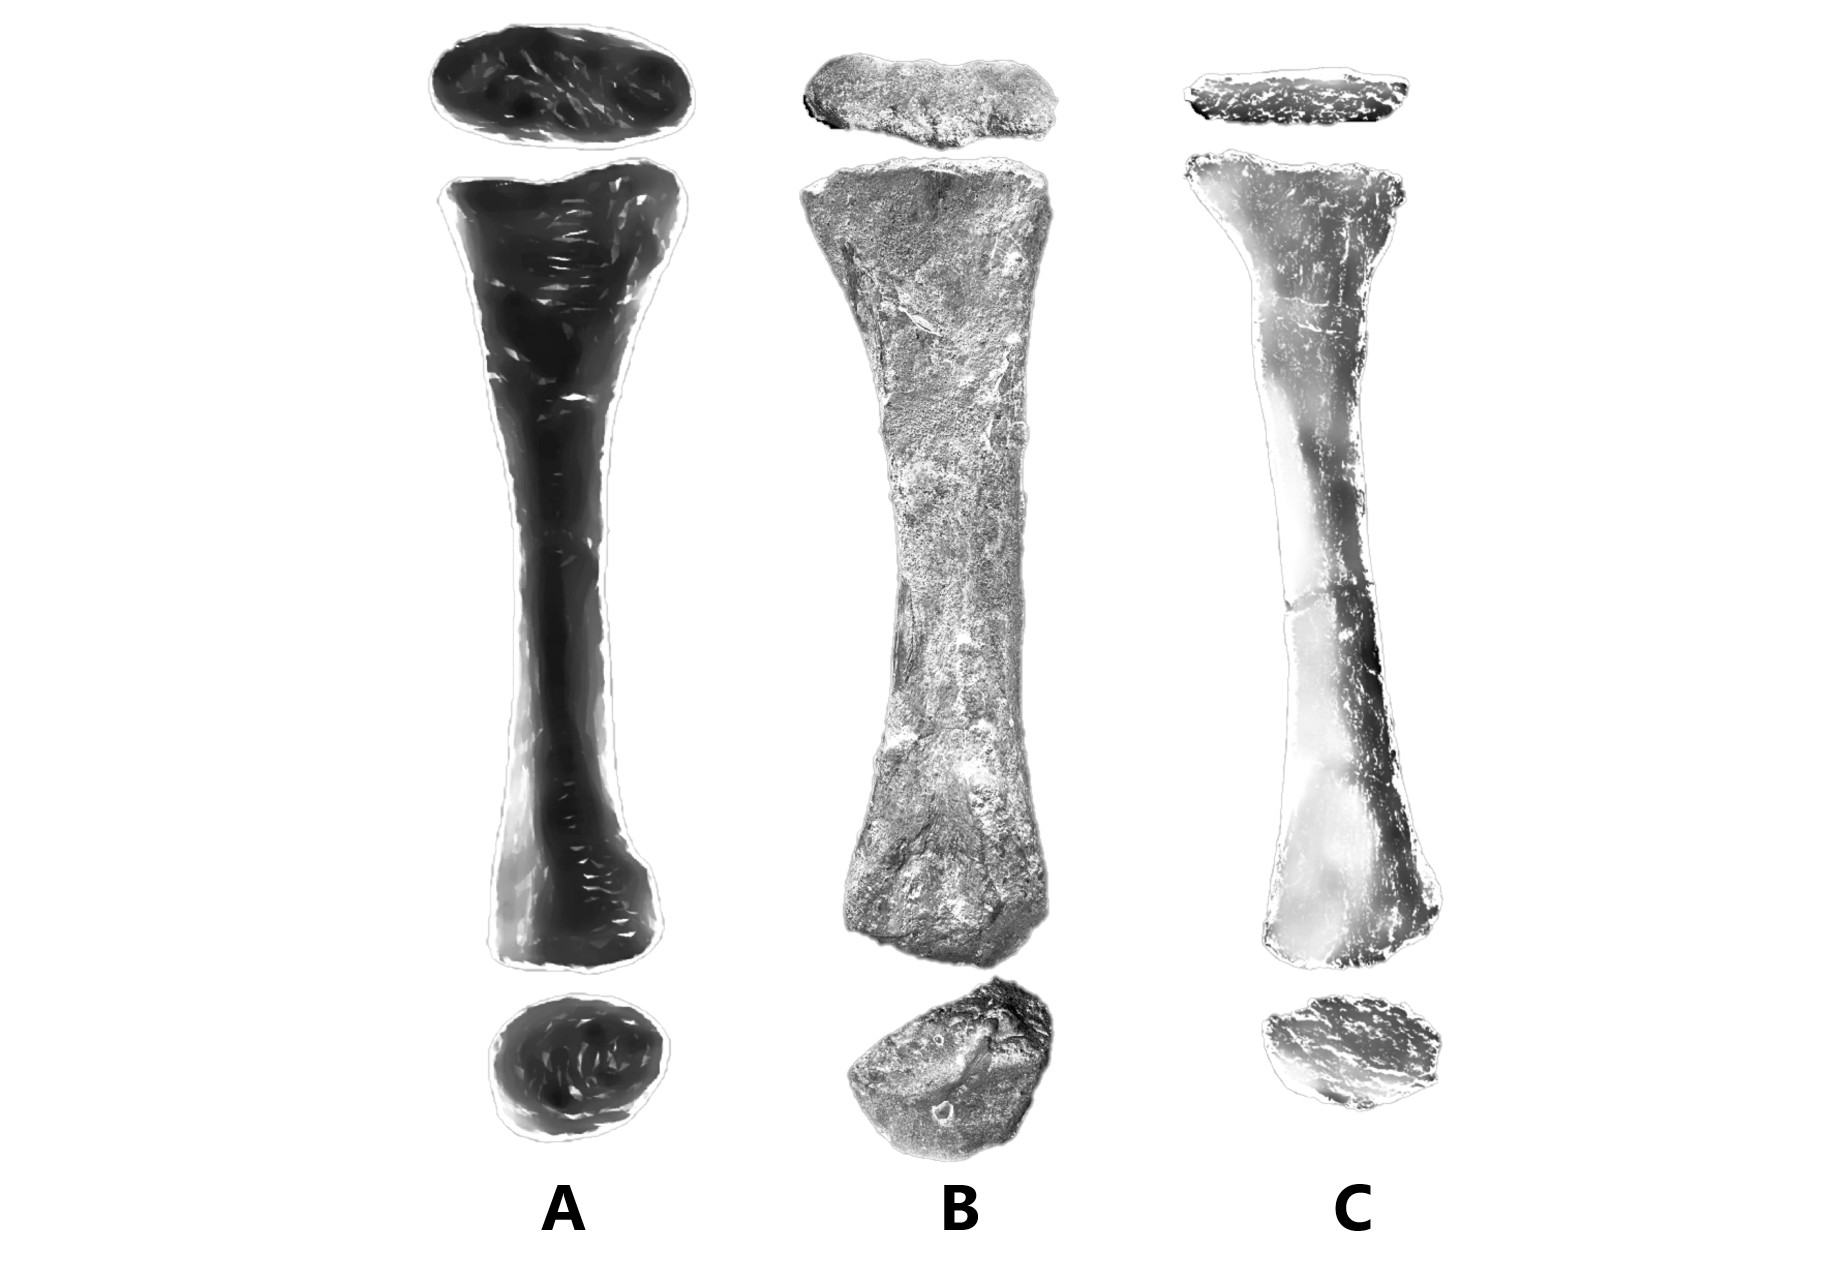 Comparison of radius bone (forelimb) between Sauropodomorpha with Spinosaurid. From left to right: A. Plateosaurus (Prosauropod)[9]; B. Spinosaurus (Spinosaurid); and C. Zby atlanticus (Sauropod)[10].